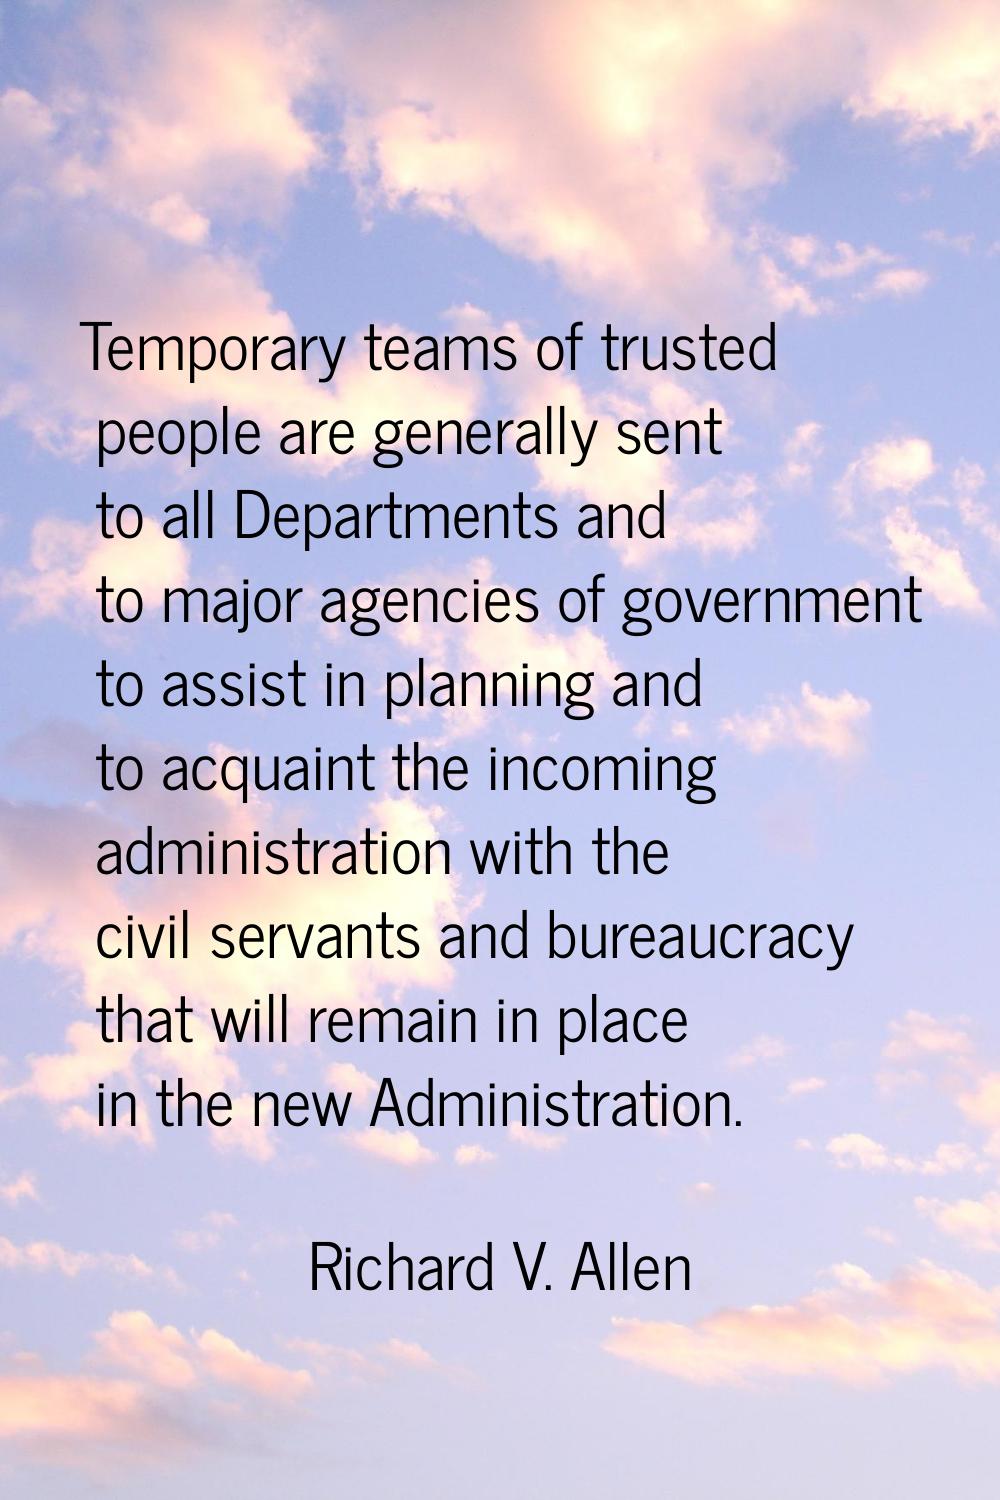 Temporary teams of trusted people are generally sent to all Departments and to major agencies of go